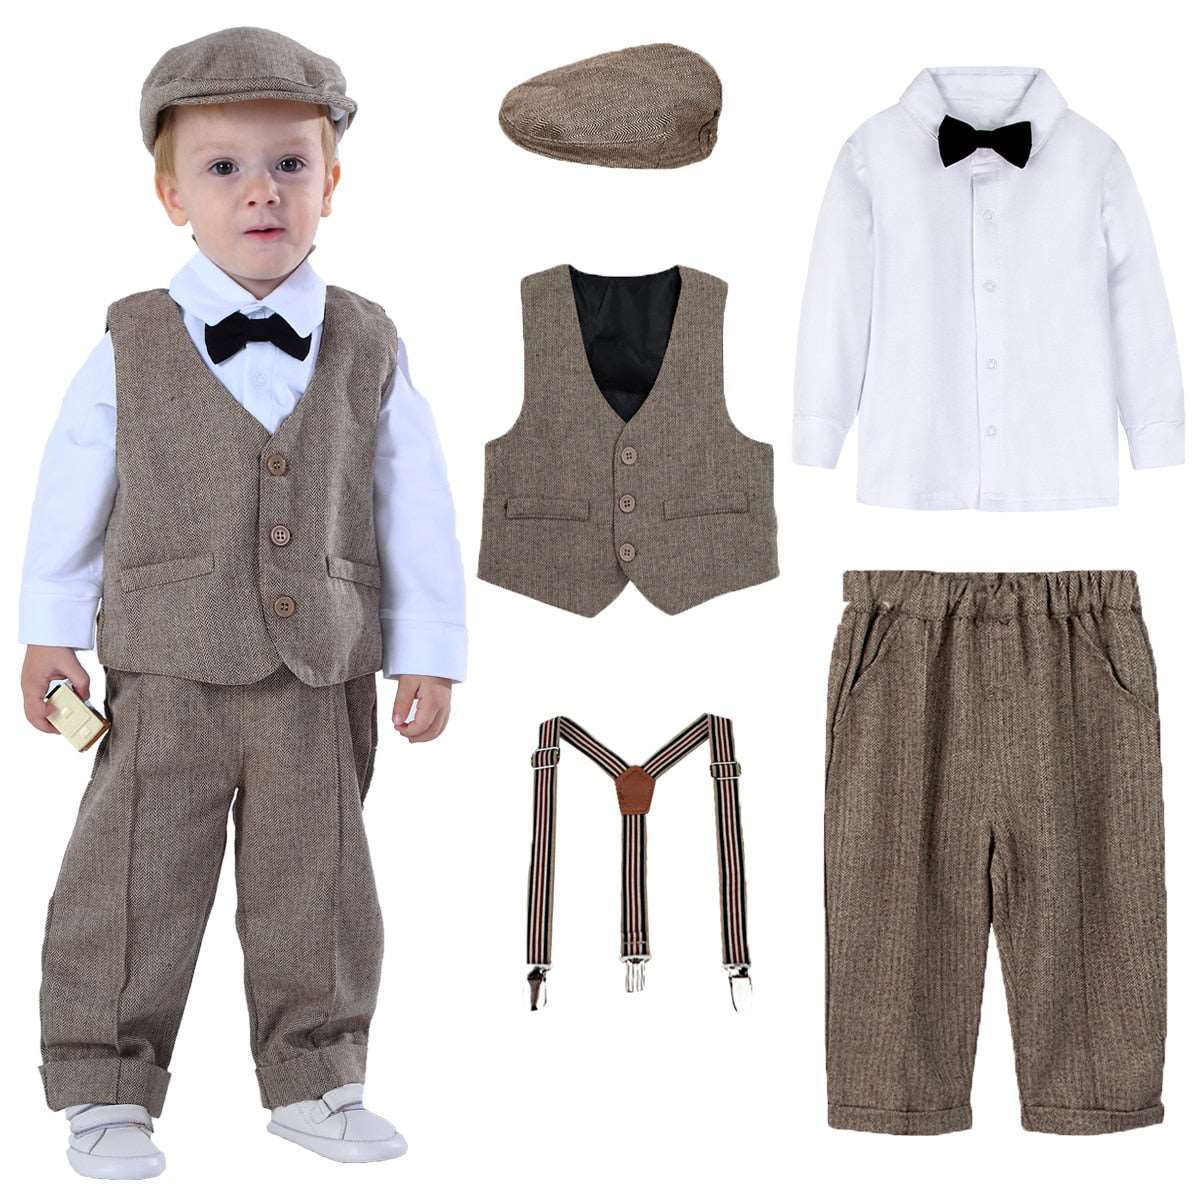 Baby Formal Outfit Infant Suit Newborn Gentleman Long Sleeve Overalls Toddler Birthday Wedding Party Gift Costume 5PCS